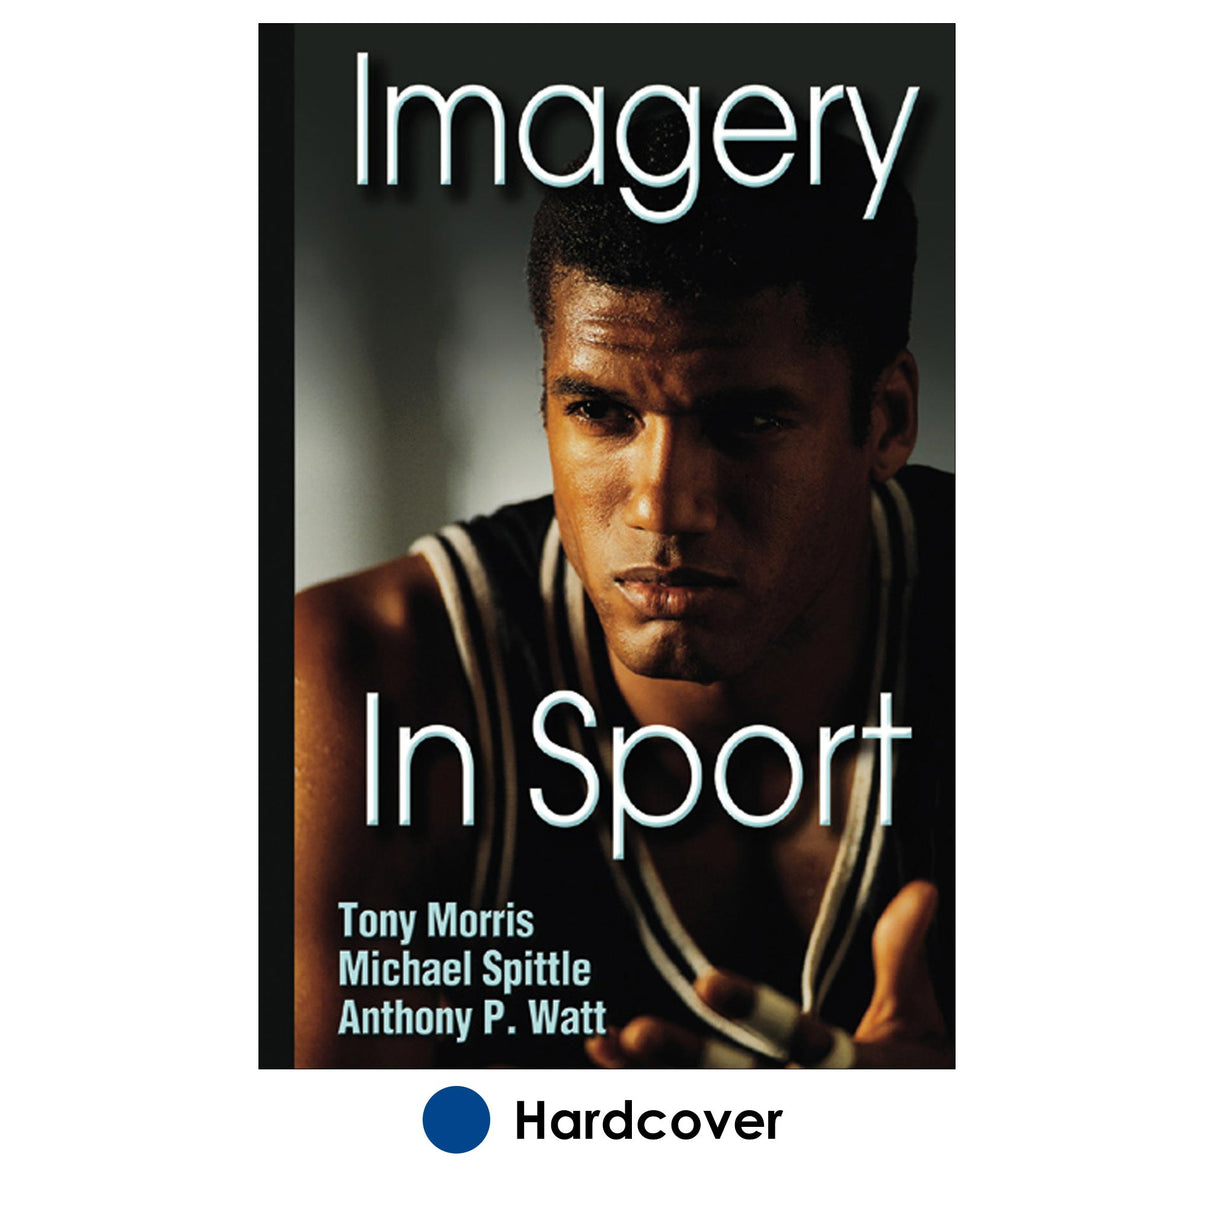 Imagery in Sport